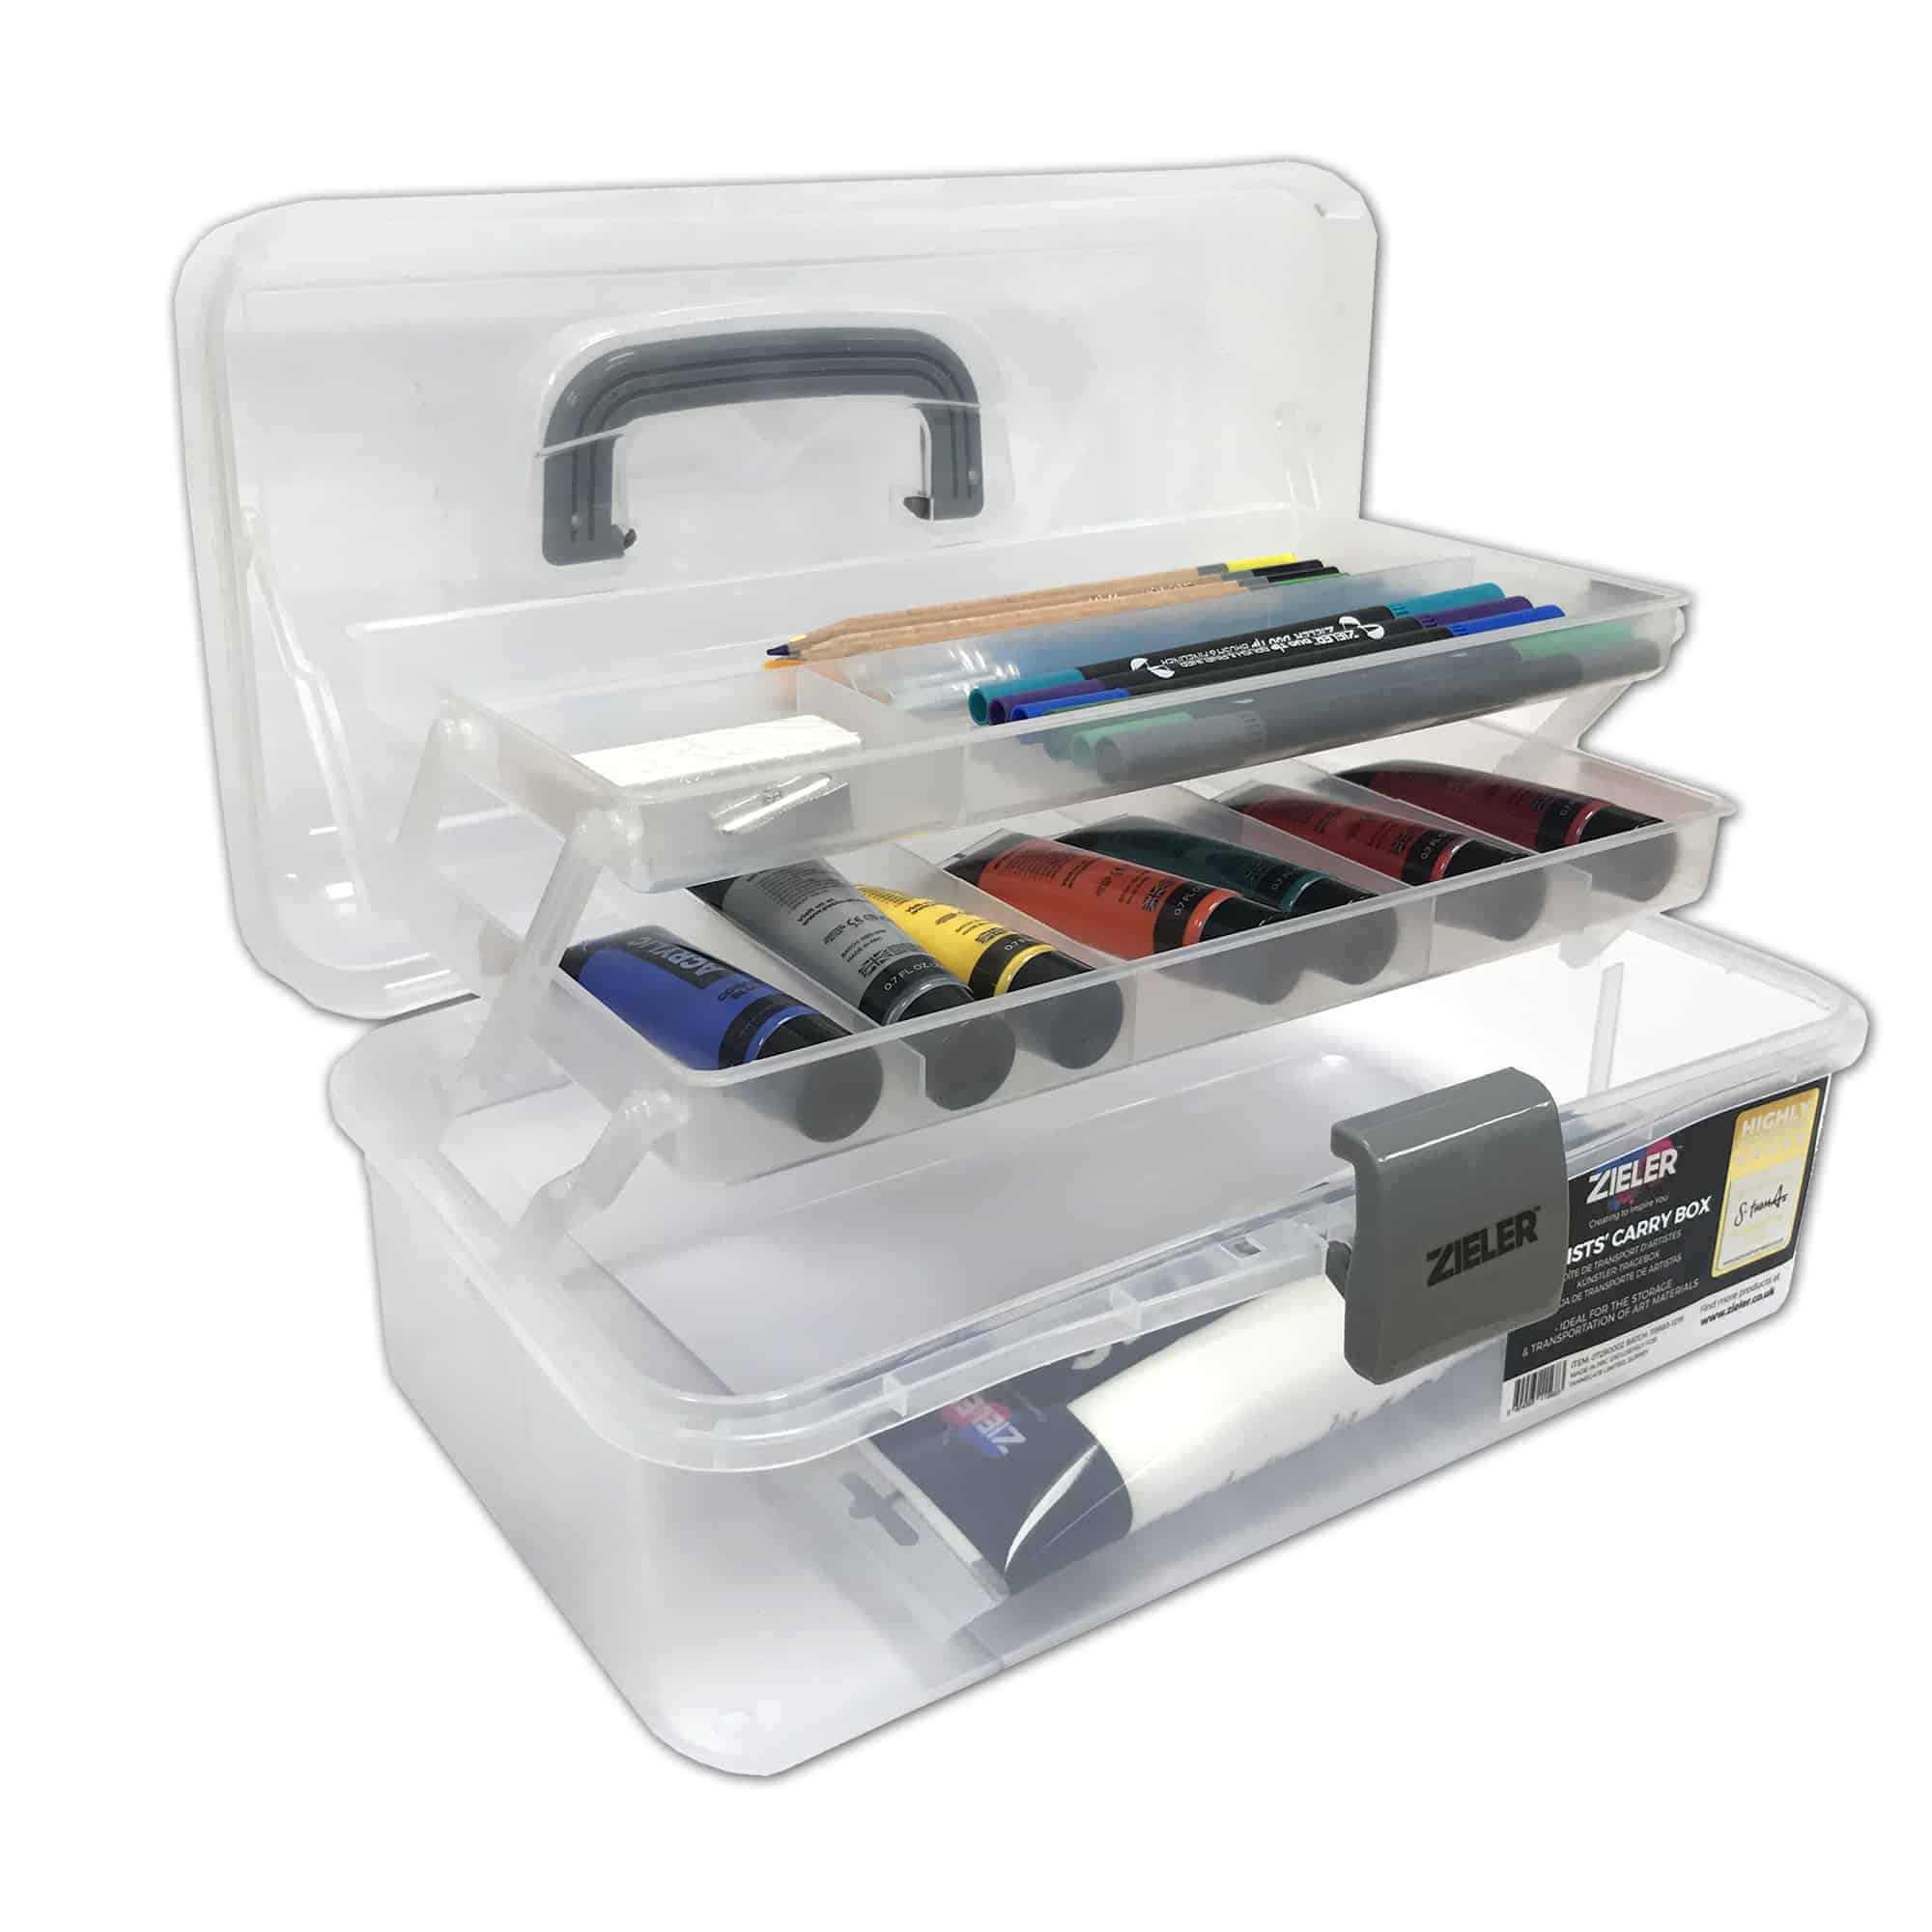 Zieler Artists Carry/Caddy Box (Translucent White) - Ideal Storage For Artists